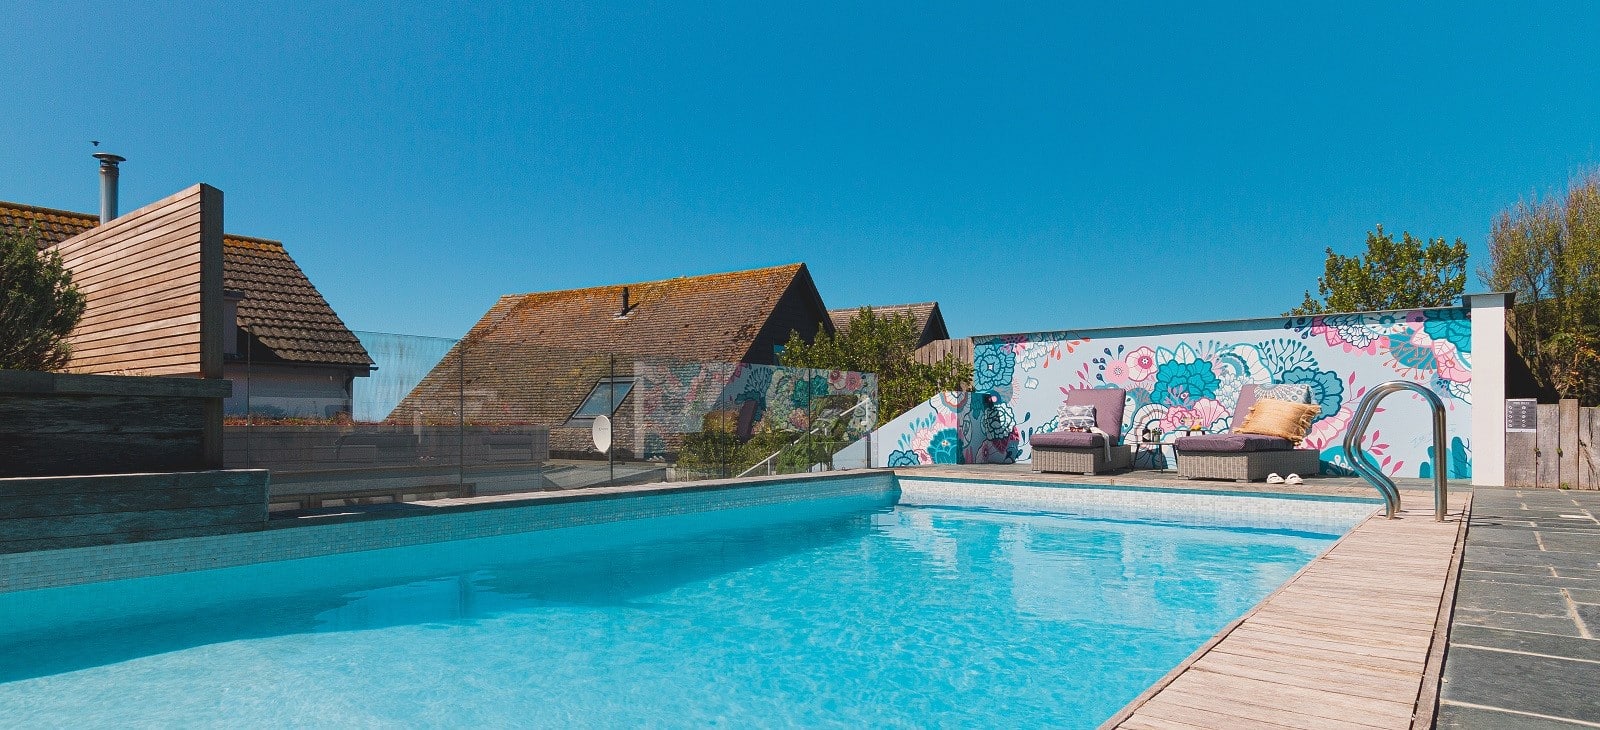 Swimming pool with floral feature wall.